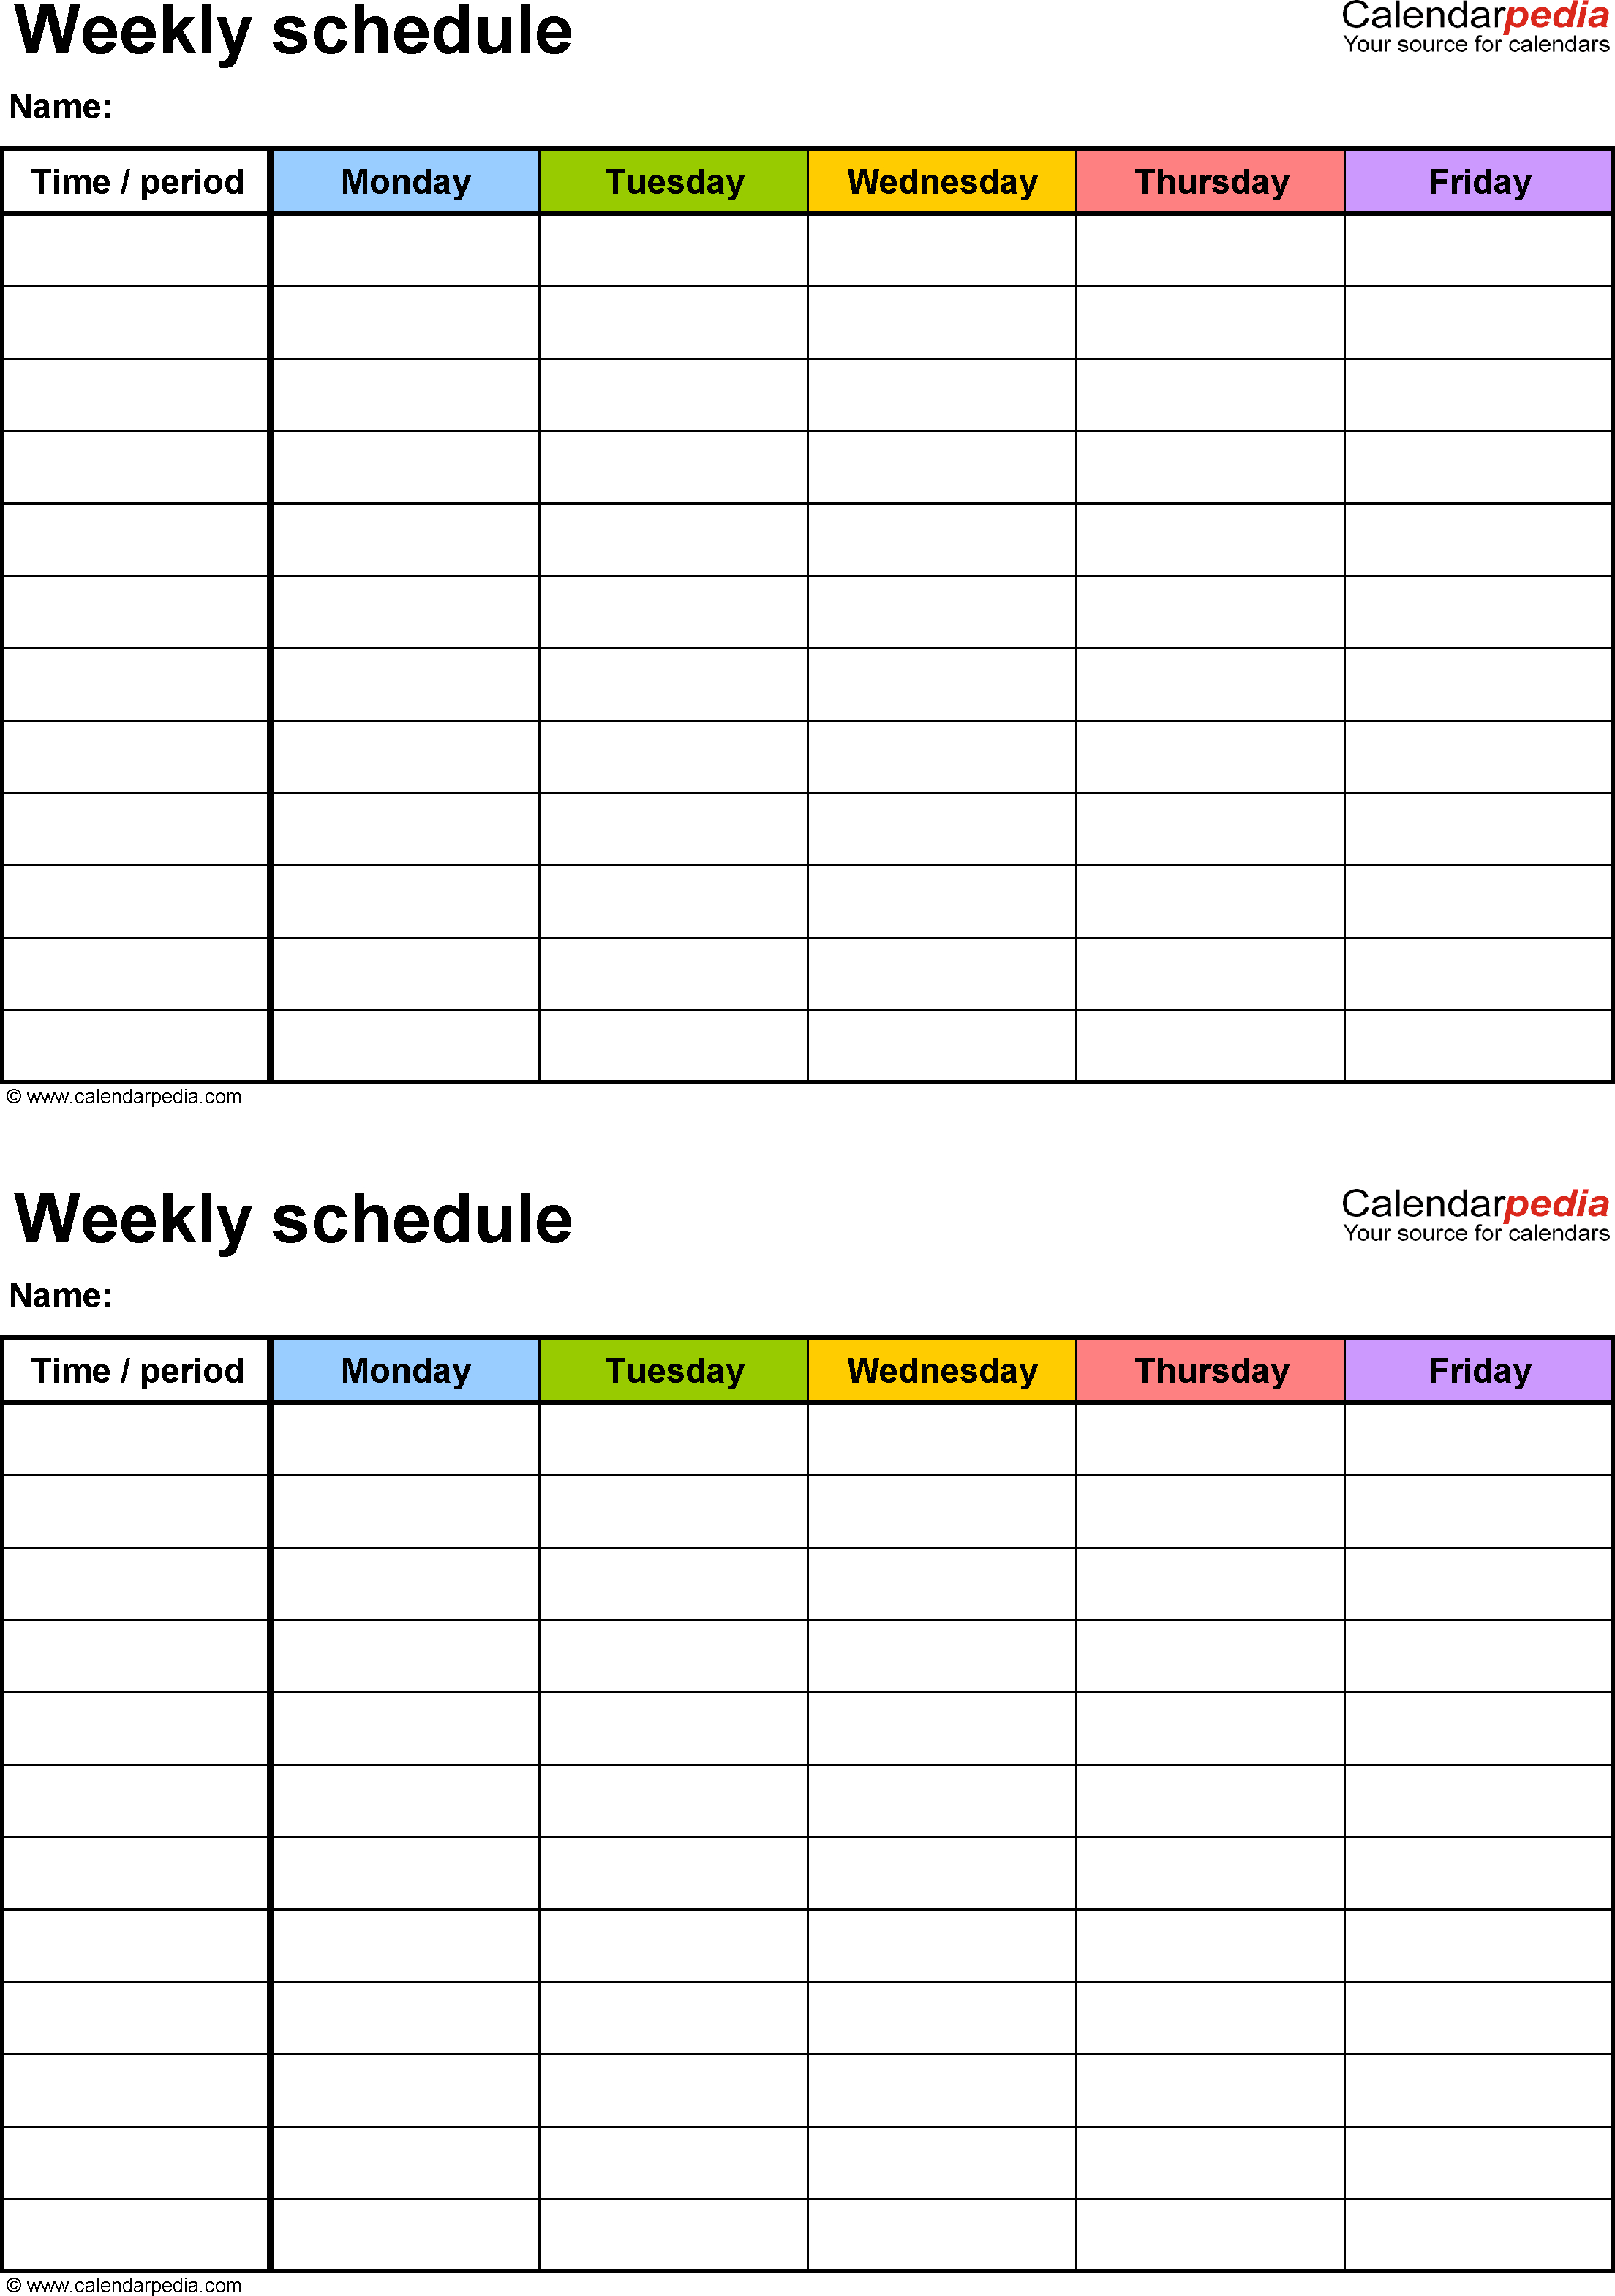 Scheduling Spreadsheet Free In Free Weekly Schedule Templates For Excel  18 Templates